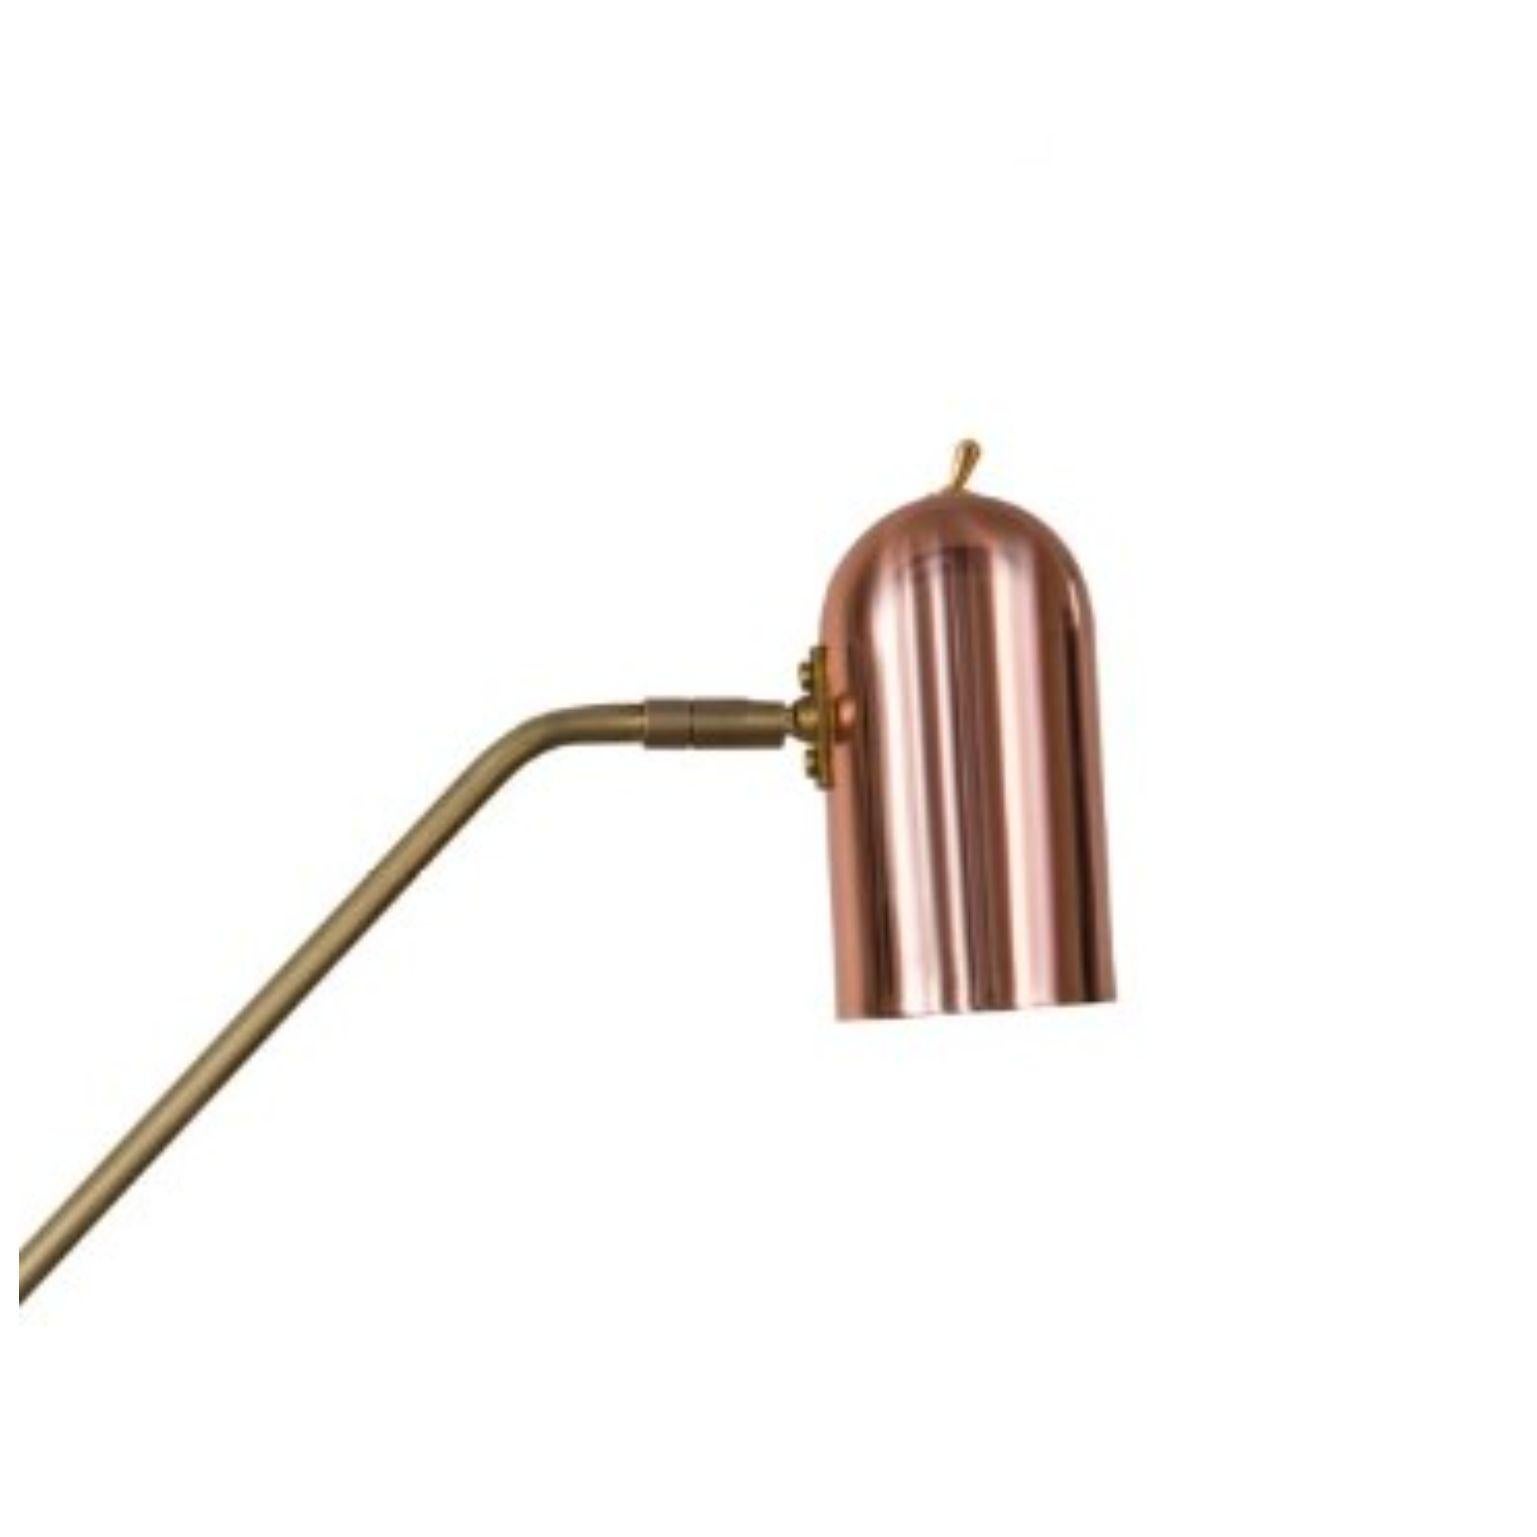 Contemporary Stasis Table Light, Brass + Polished Copper by Bert Frank